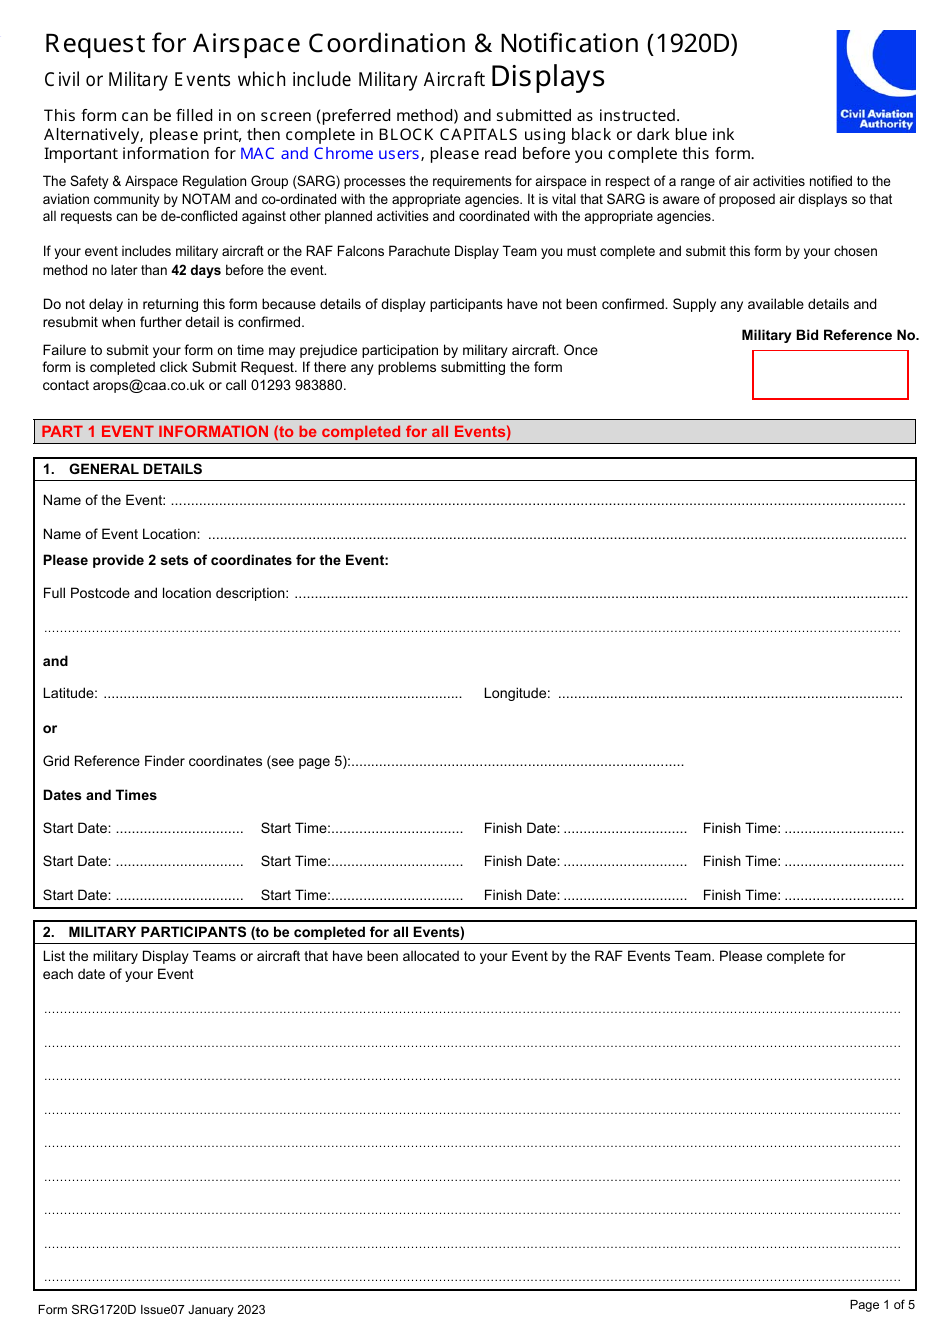 Form SRG1720D Request for Airspace Coordination  Notification (1920d) - United Kingdom, Page 1